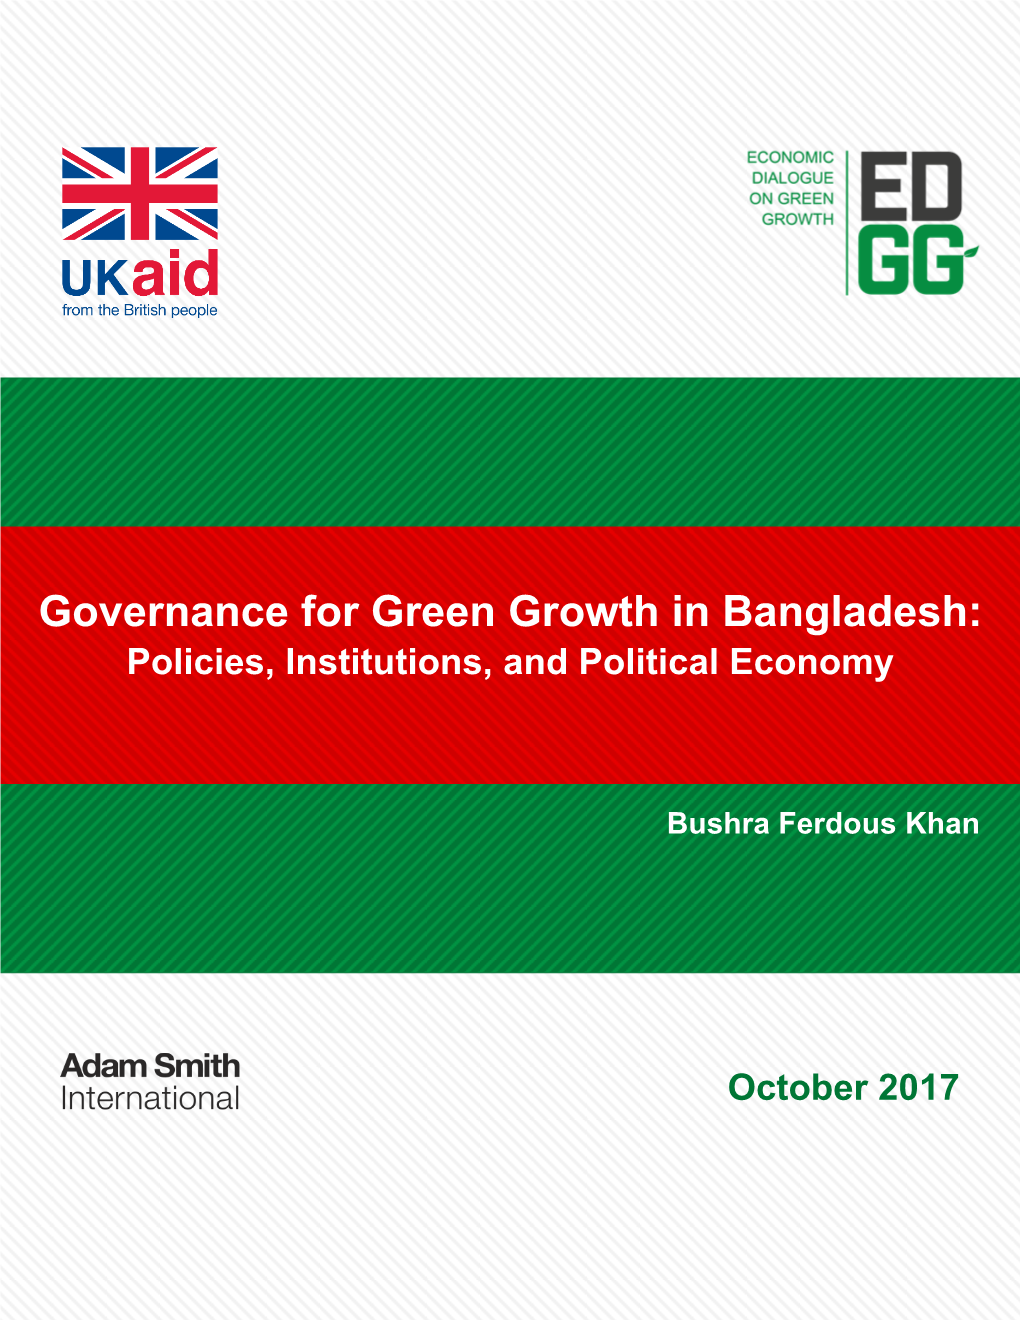 Governance for Green Growth in Bangladesh: Policies, Institutions, and Political Economy